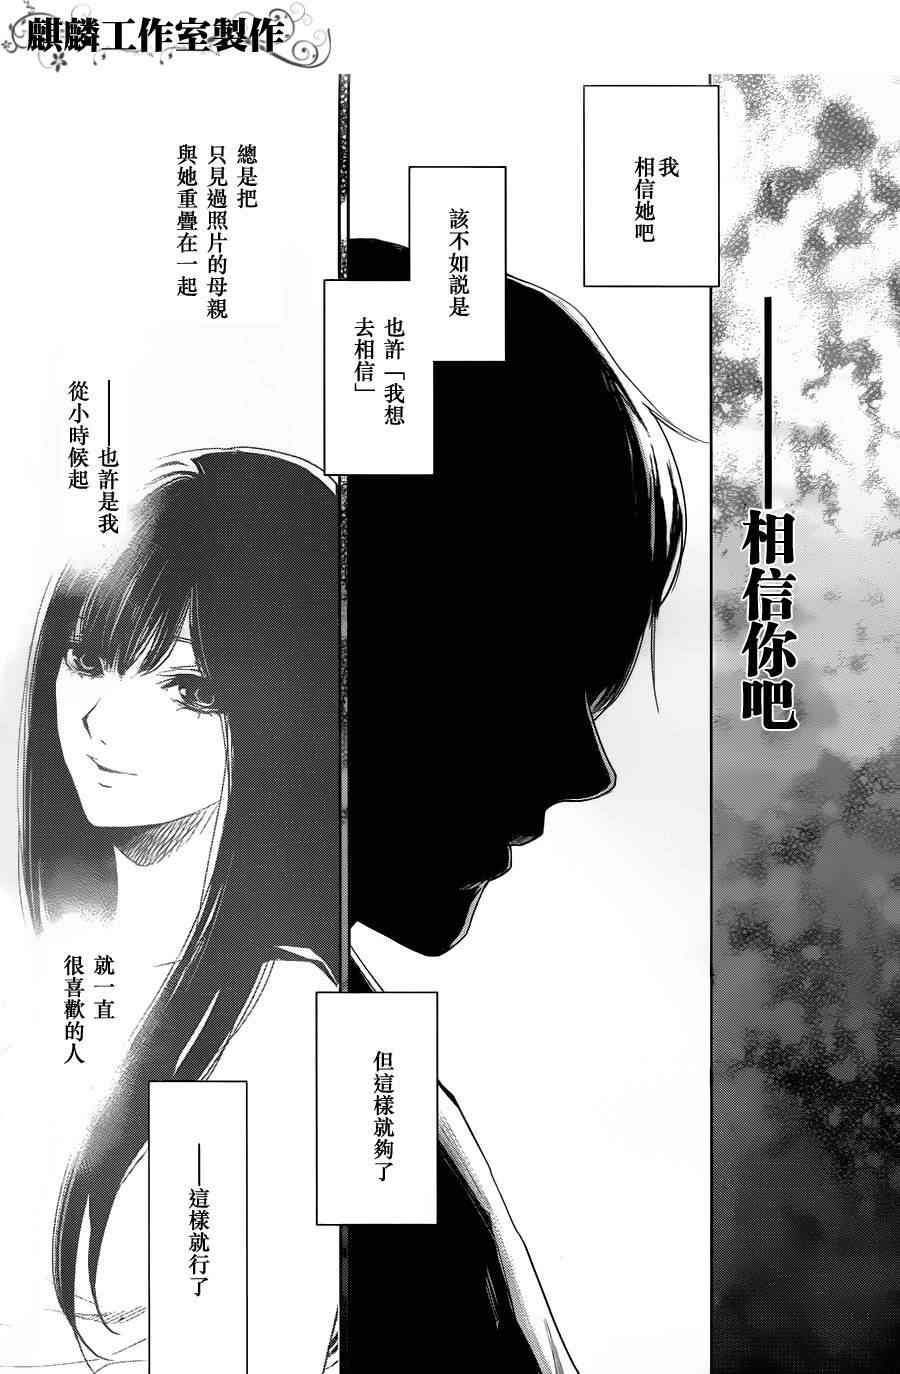 《Another》漫画 another19集